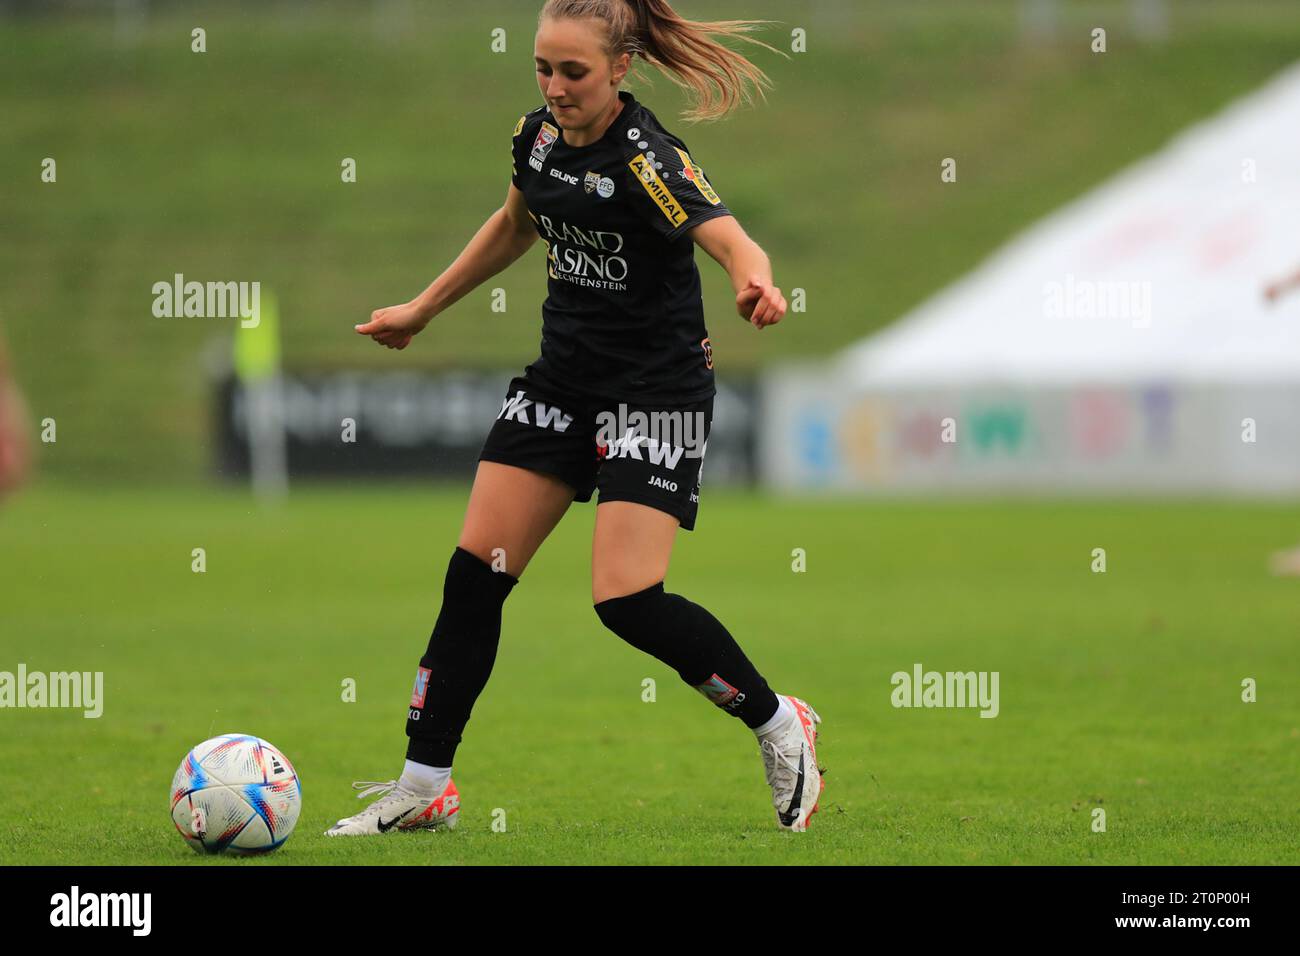 Hannah Fankhauser (17 Altach) in action during the Admiral Frauen Bundesliga match First Vienna FC vs SCR Altach at Hohe Warte  (Tom Seiss/ SPP) Stock Photo